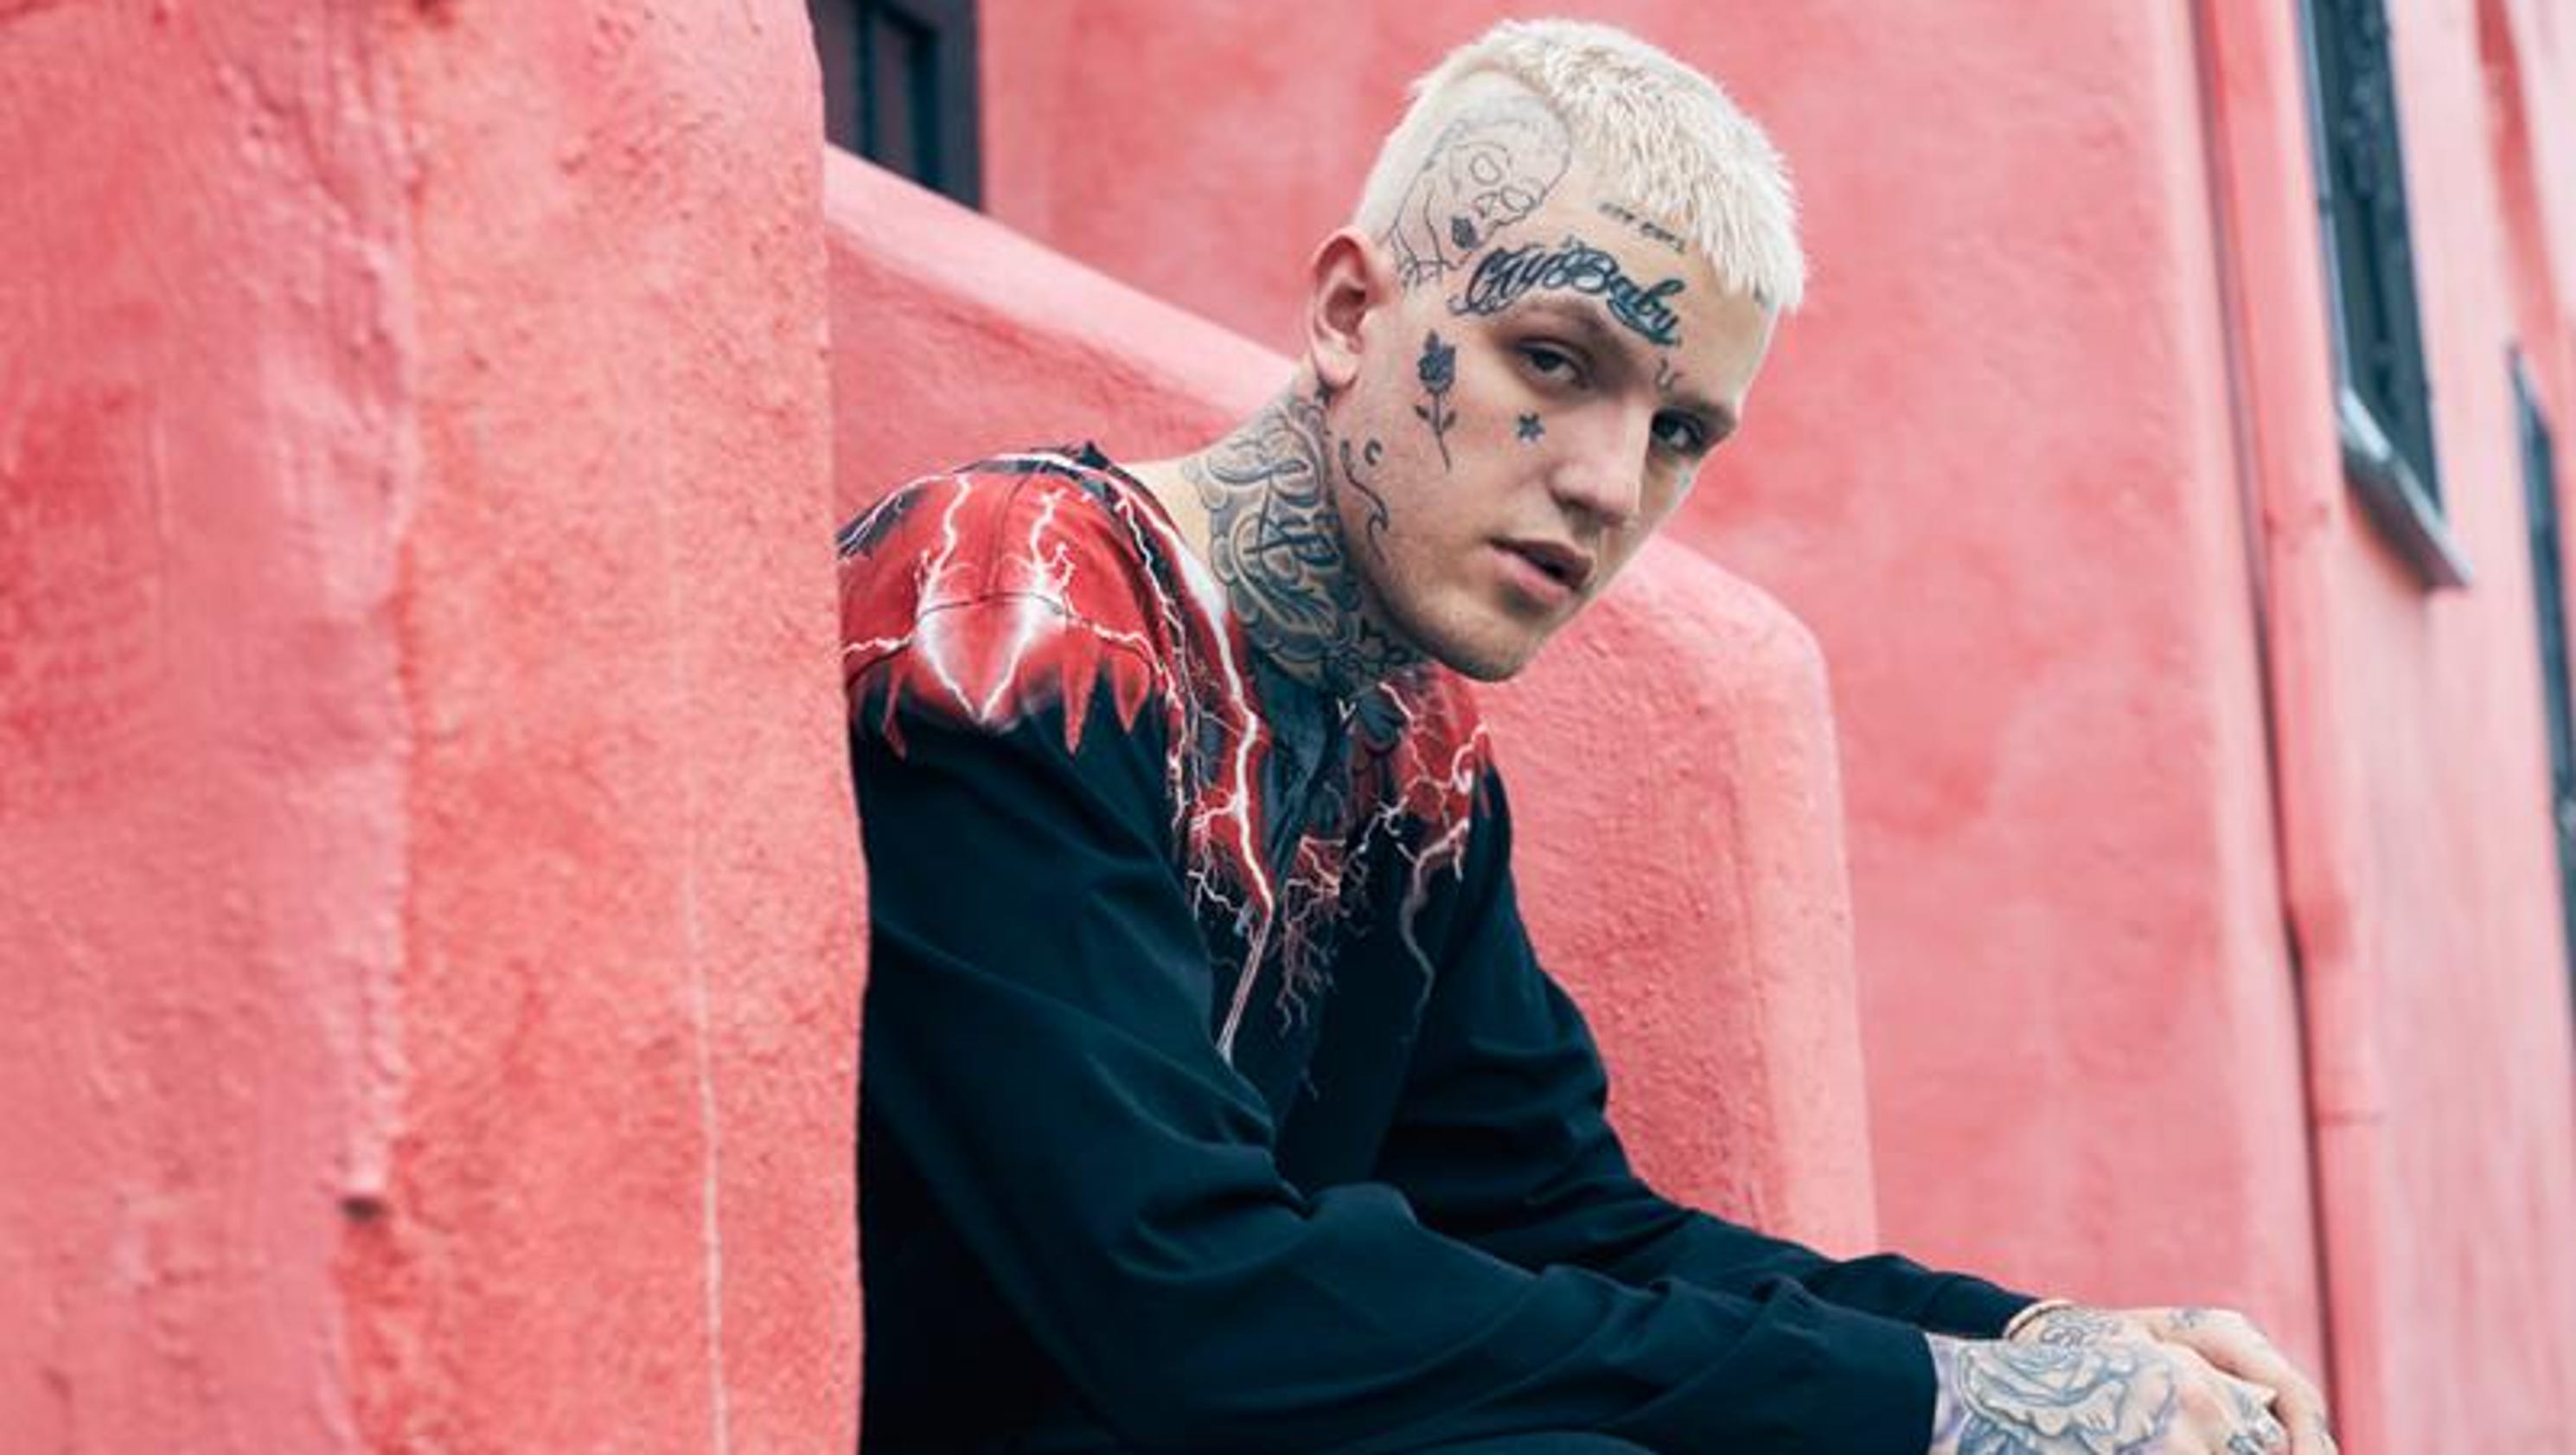 Rapper Lil Peep dies at 21, fans mourn: 'Your music changed the world'3200 x 1680